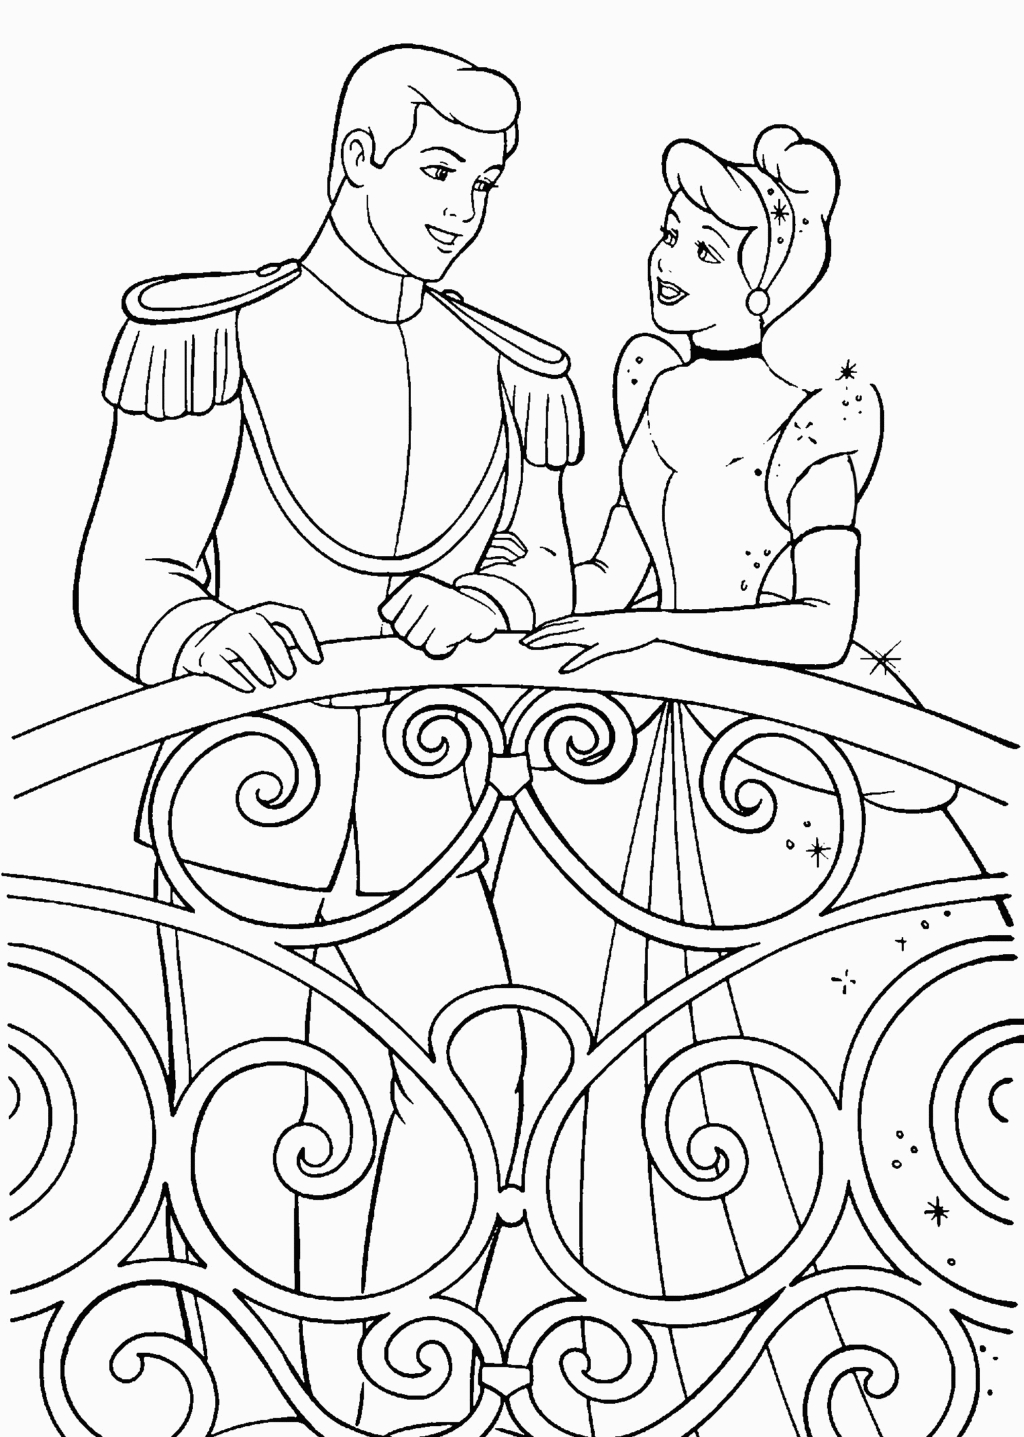 Disney Princess Coloring Pages Printable Coloring Books Free Printable Disney Princess Coloring Pages For